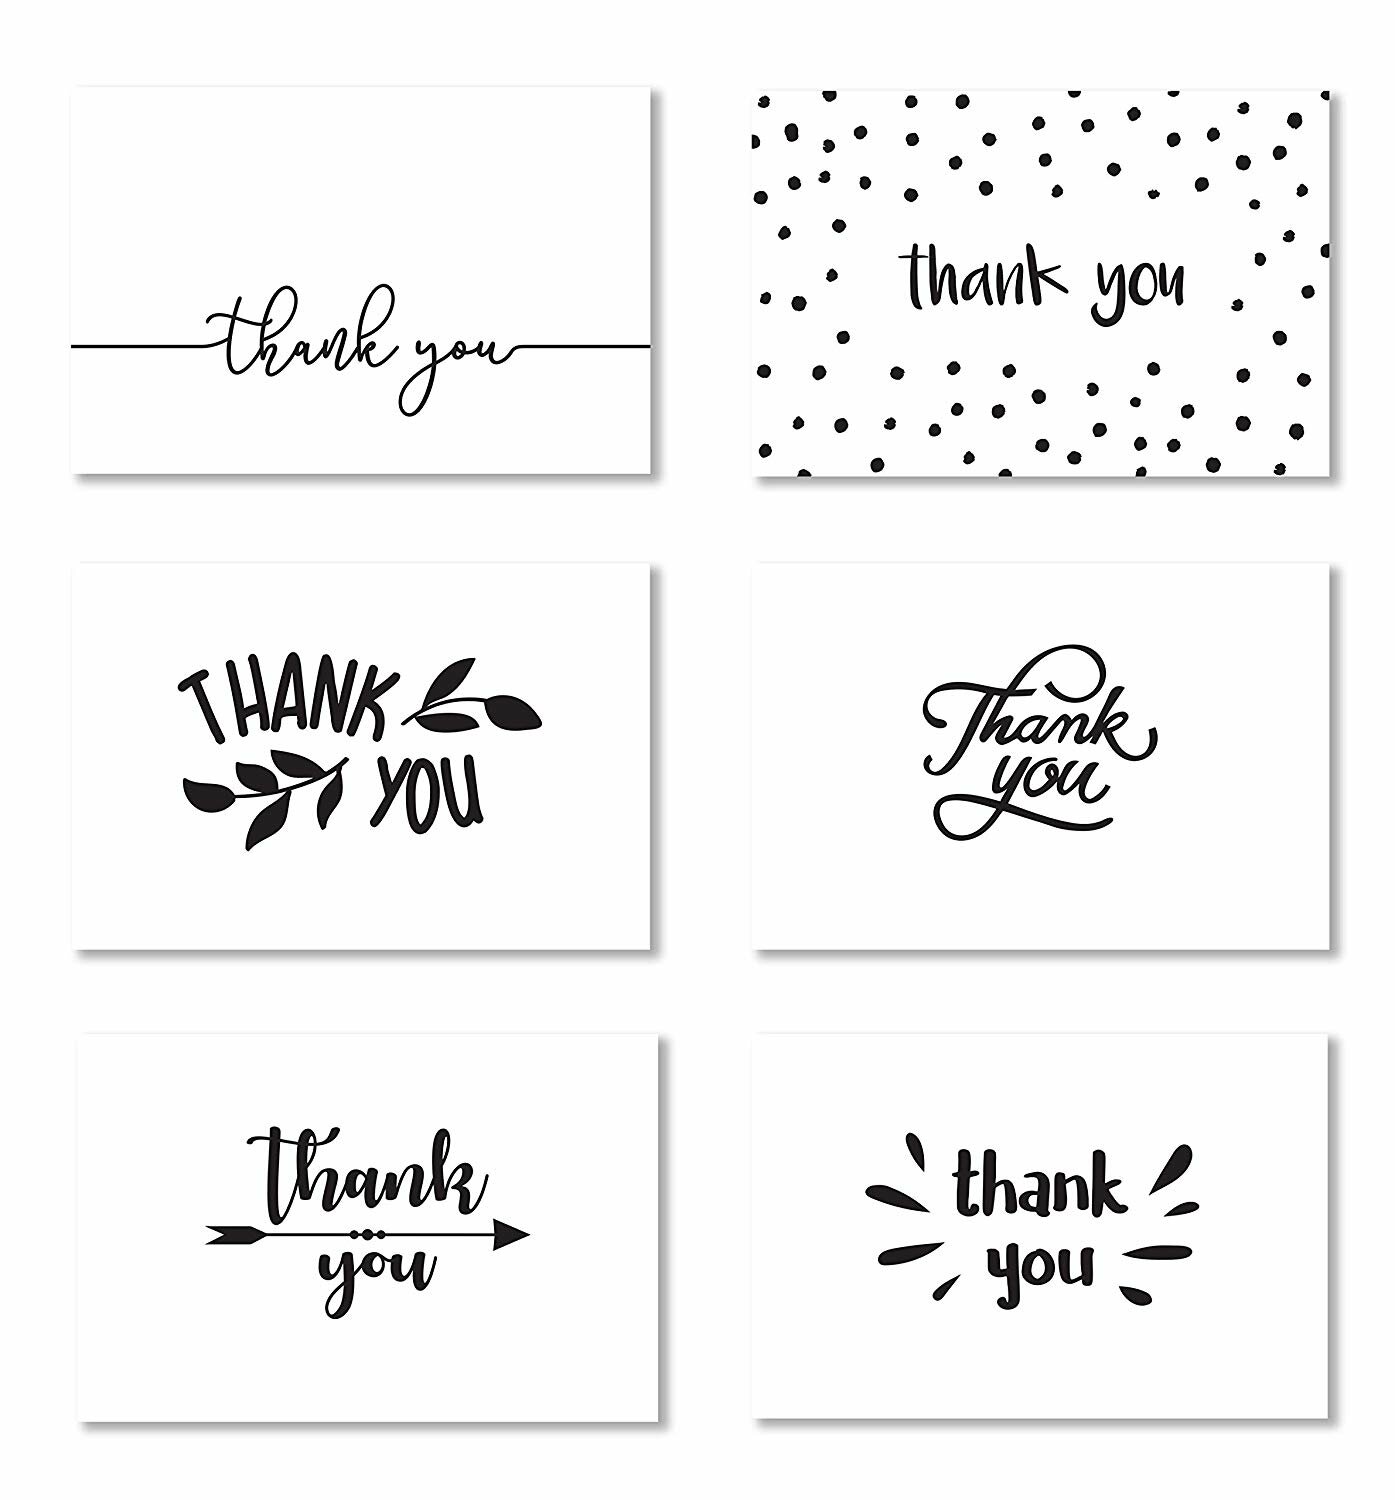 Thank You Cards Notes,36 PCS Blue Thank You Gift Cards with Envelopes and White 